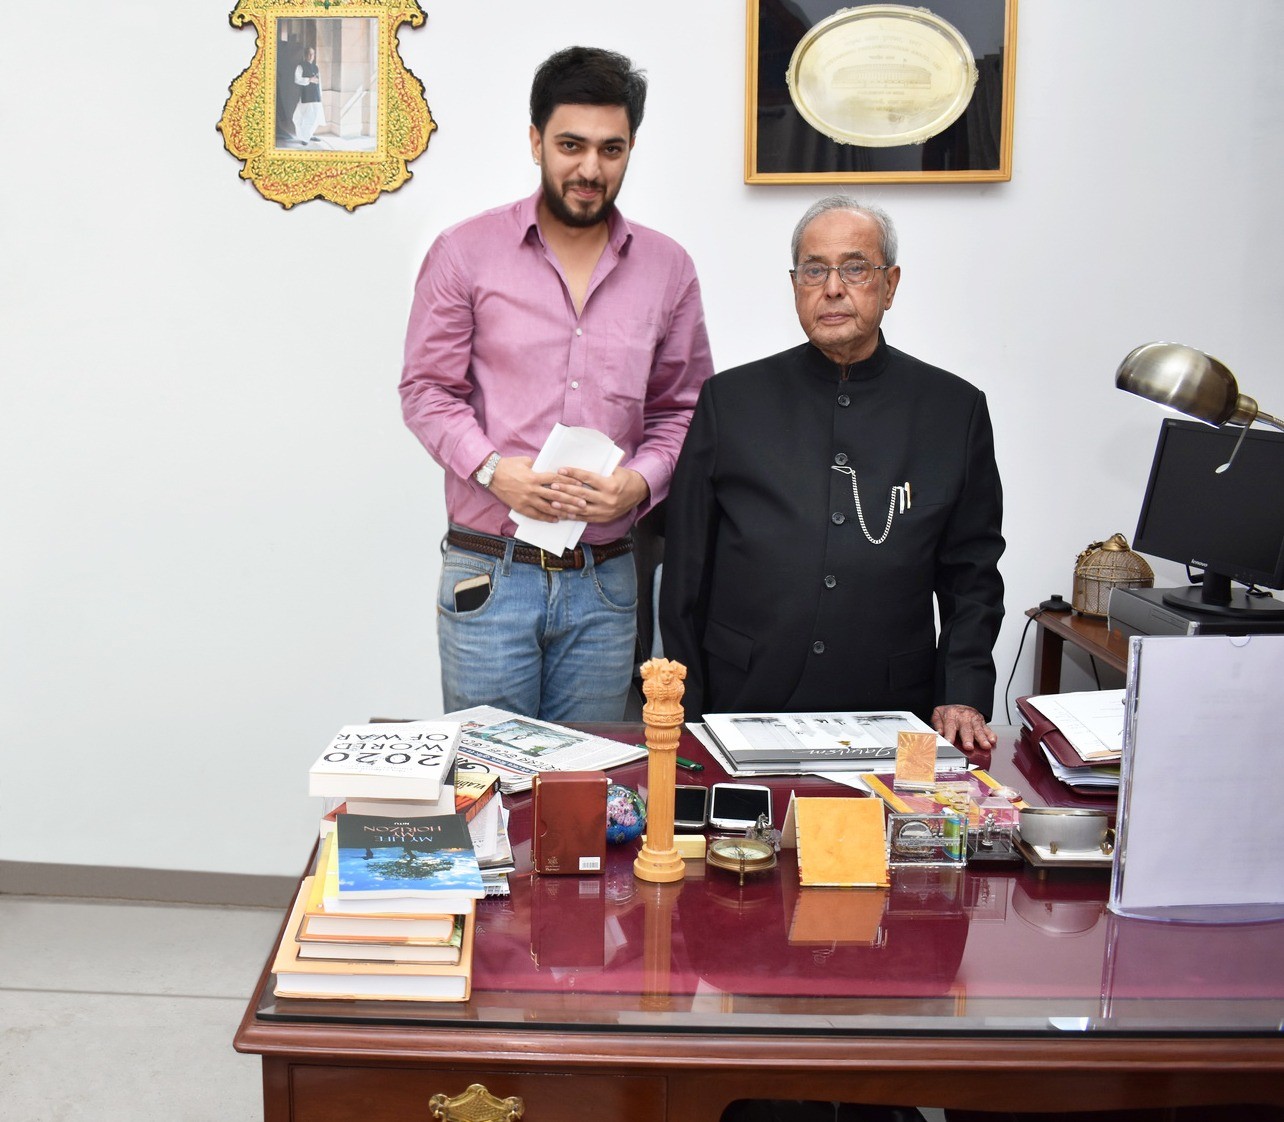 coffee-table-book-on-jainism-was-presented-to-bharat-ratnapranab-mukherjee-former-president-of-india-by-well-known-photographer-varun-joshi